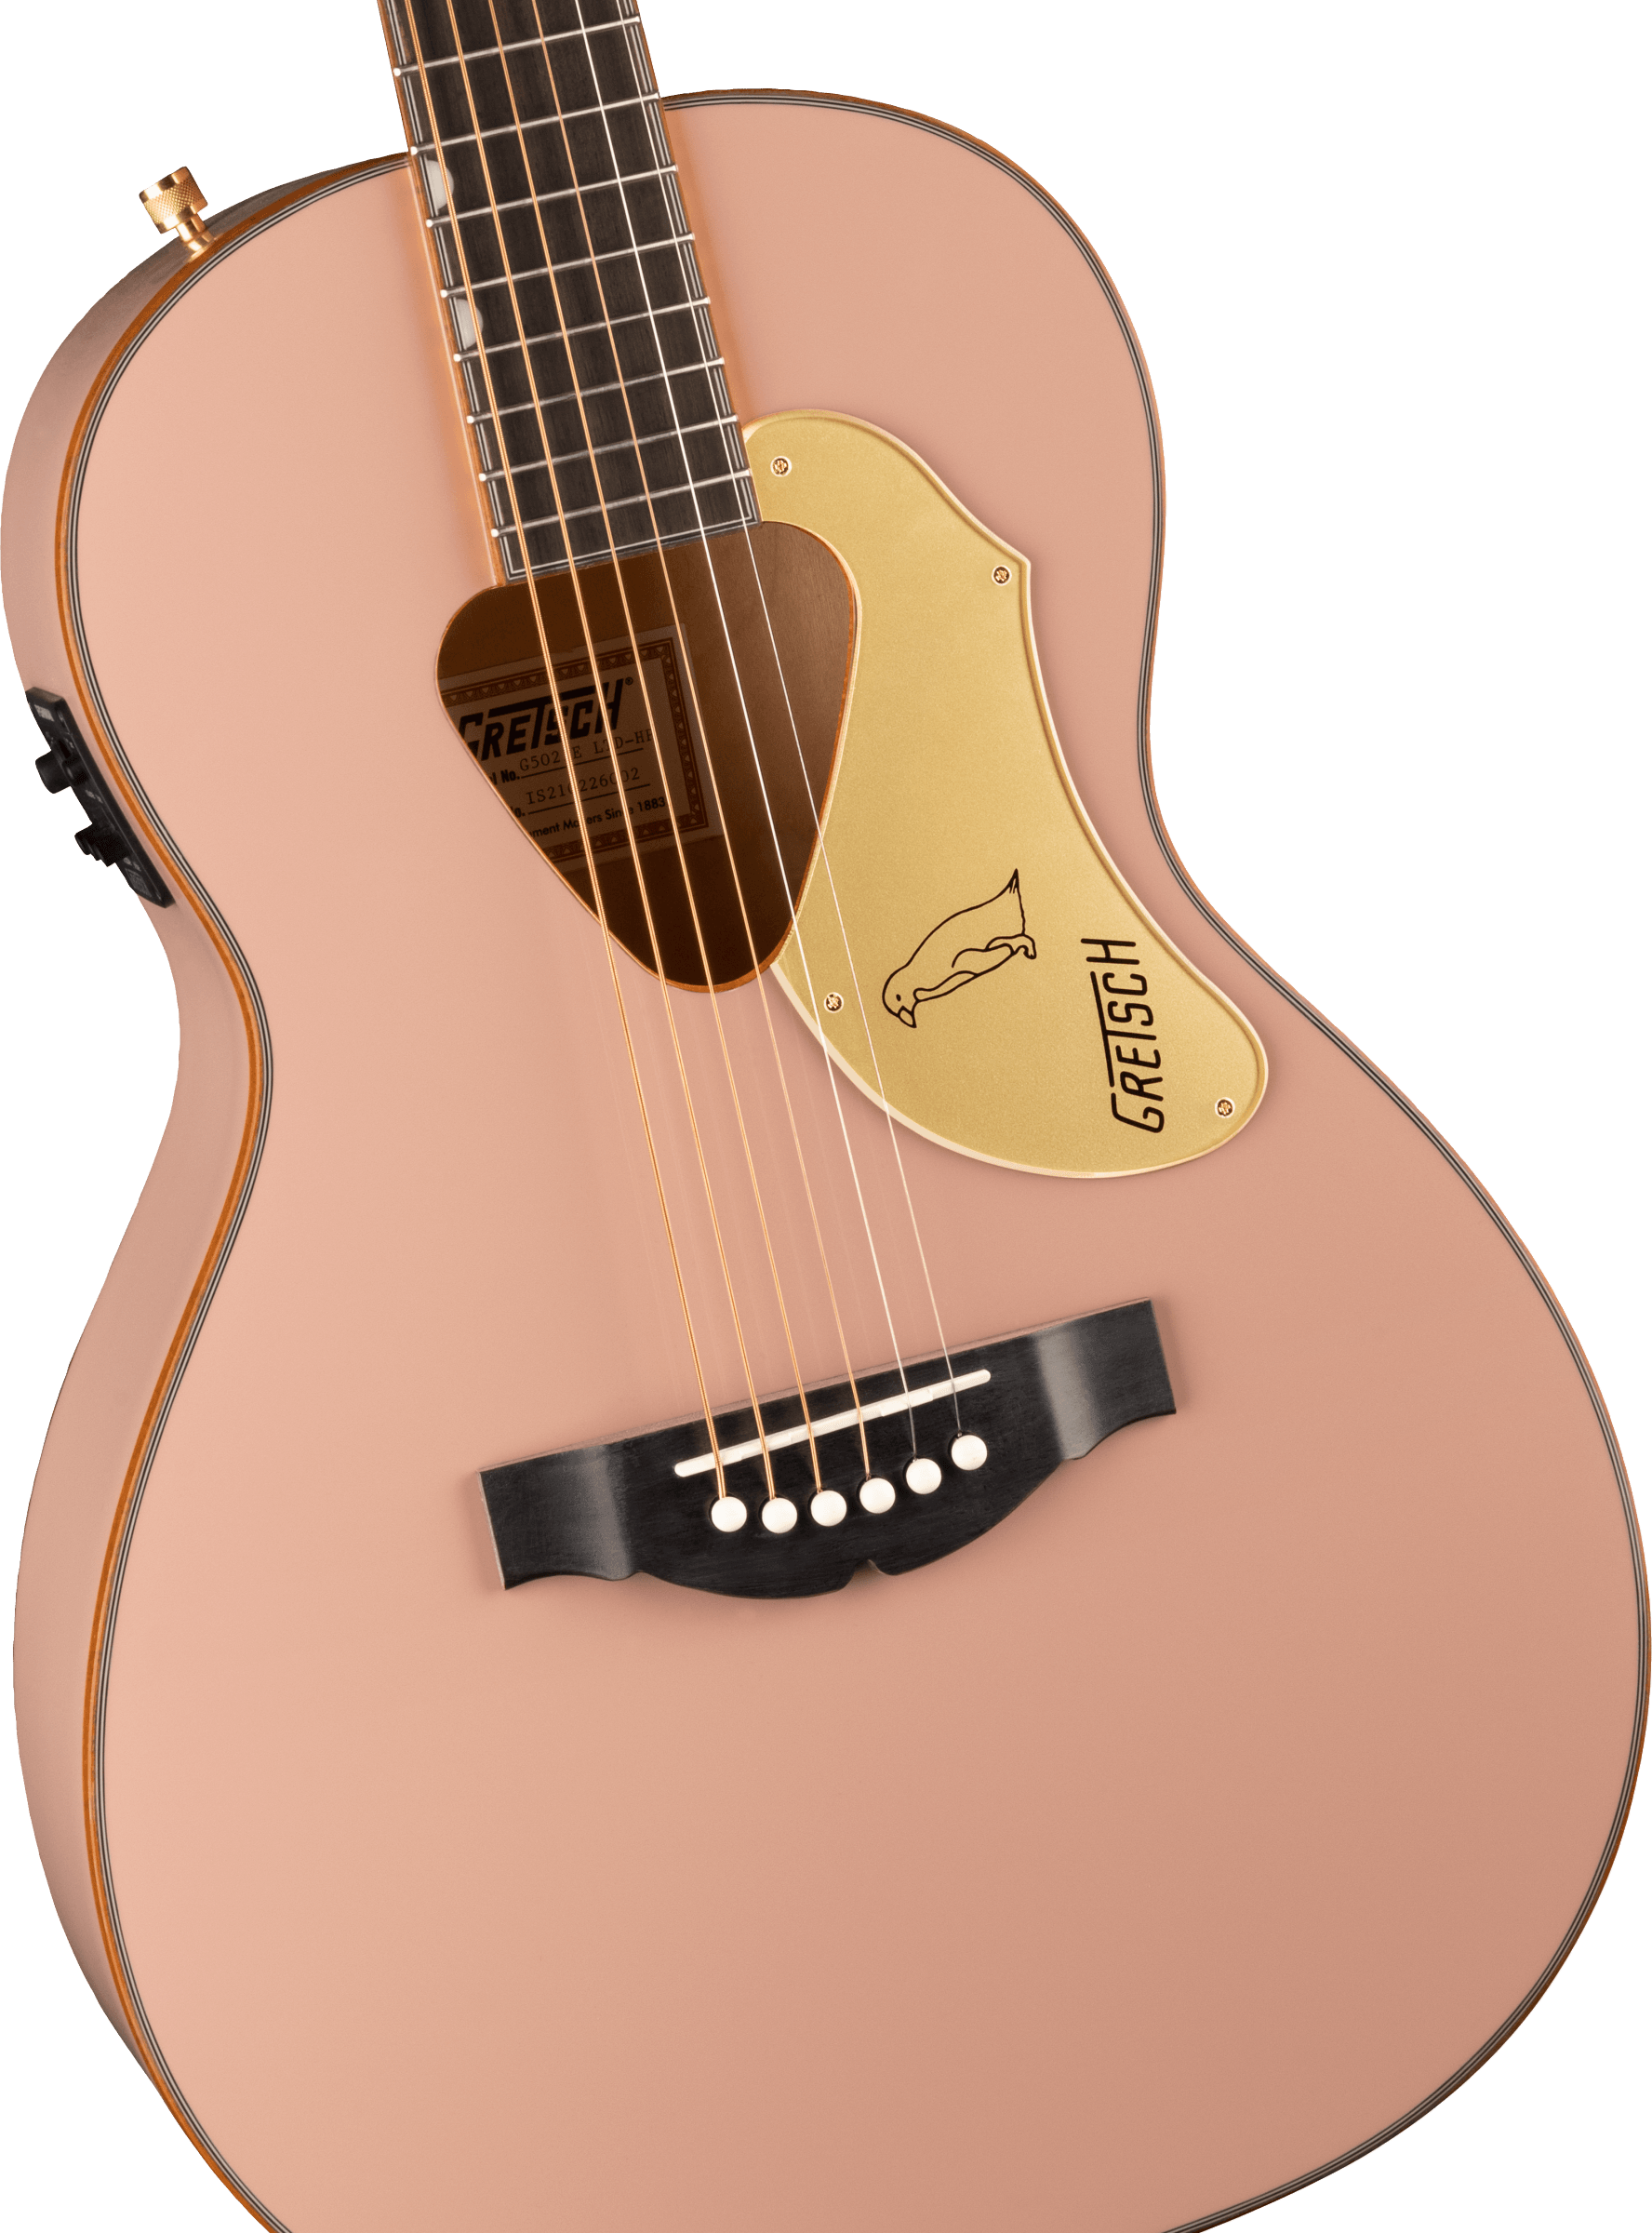 Gretsch G5021E Rancher Penguin Parlor Acoustic Electric Guitar - Shell Pink